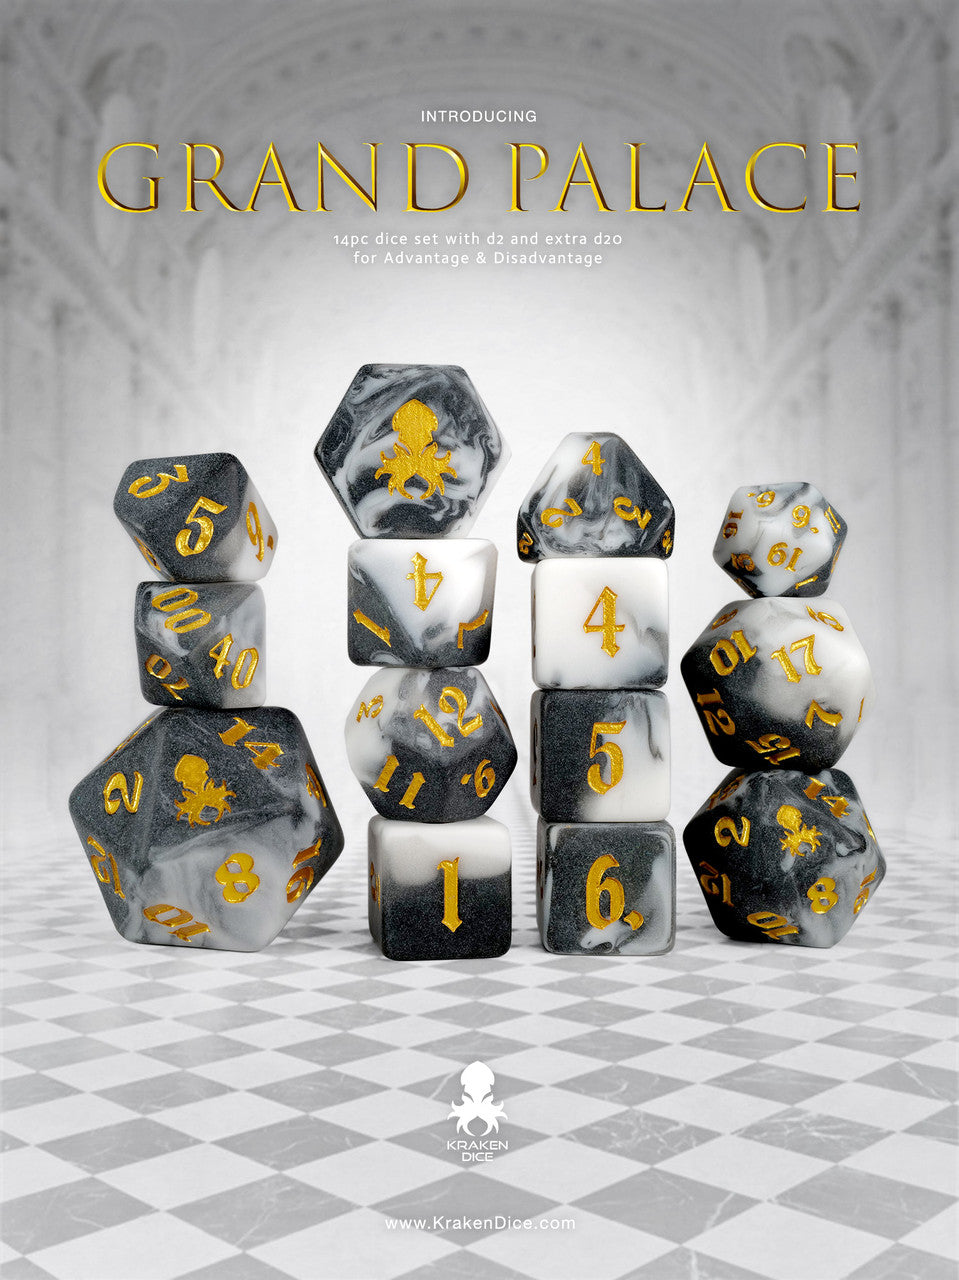 Grand Palace 14pc Dice Set inked in Gold